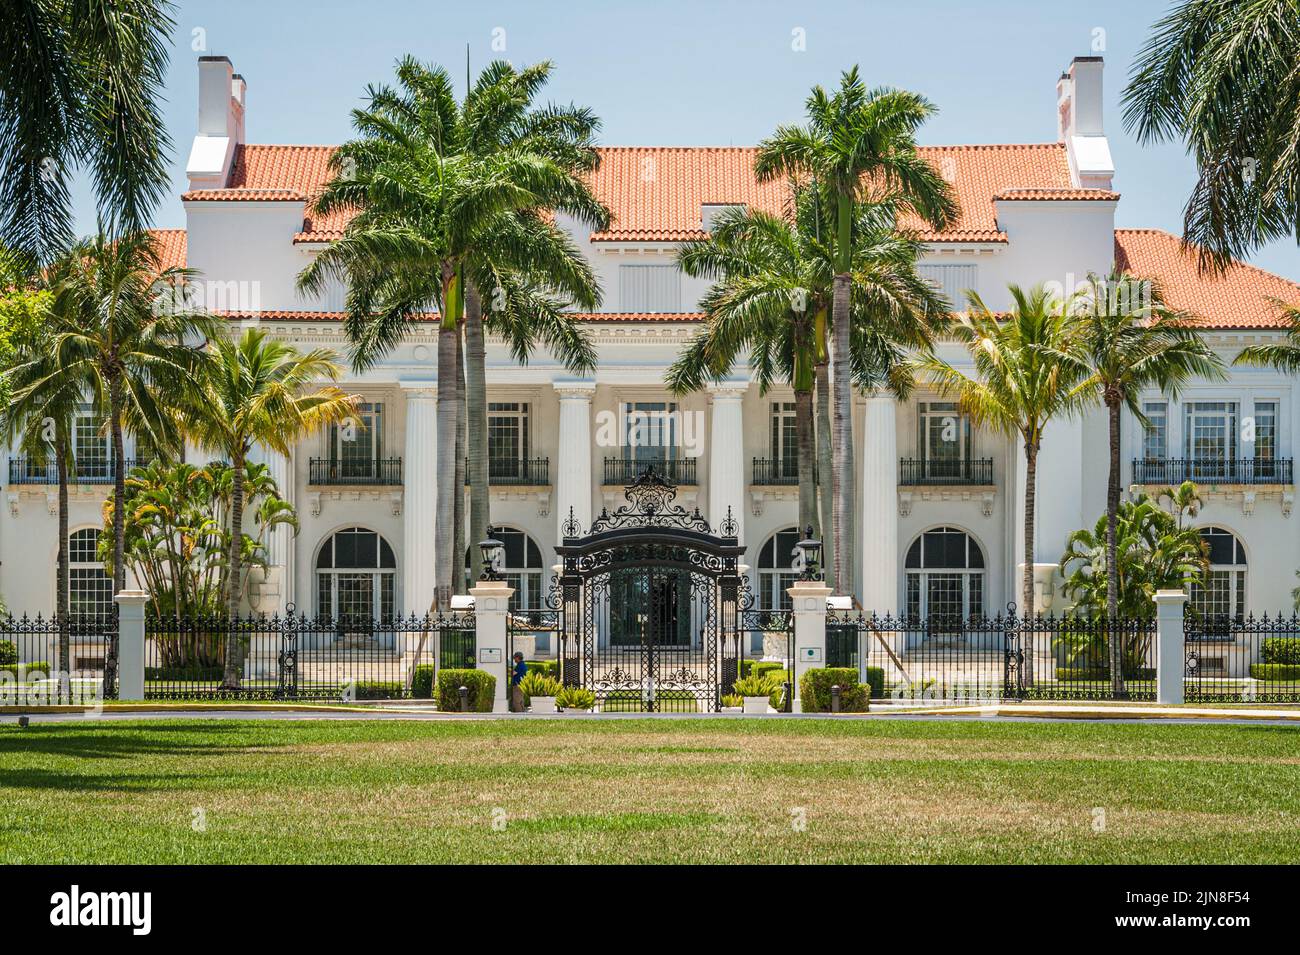 Henry Morrison Flagler's Whitehall mansion, now the Flagler Museum, in Palm Beach, Florida. (USA) Stock Photo